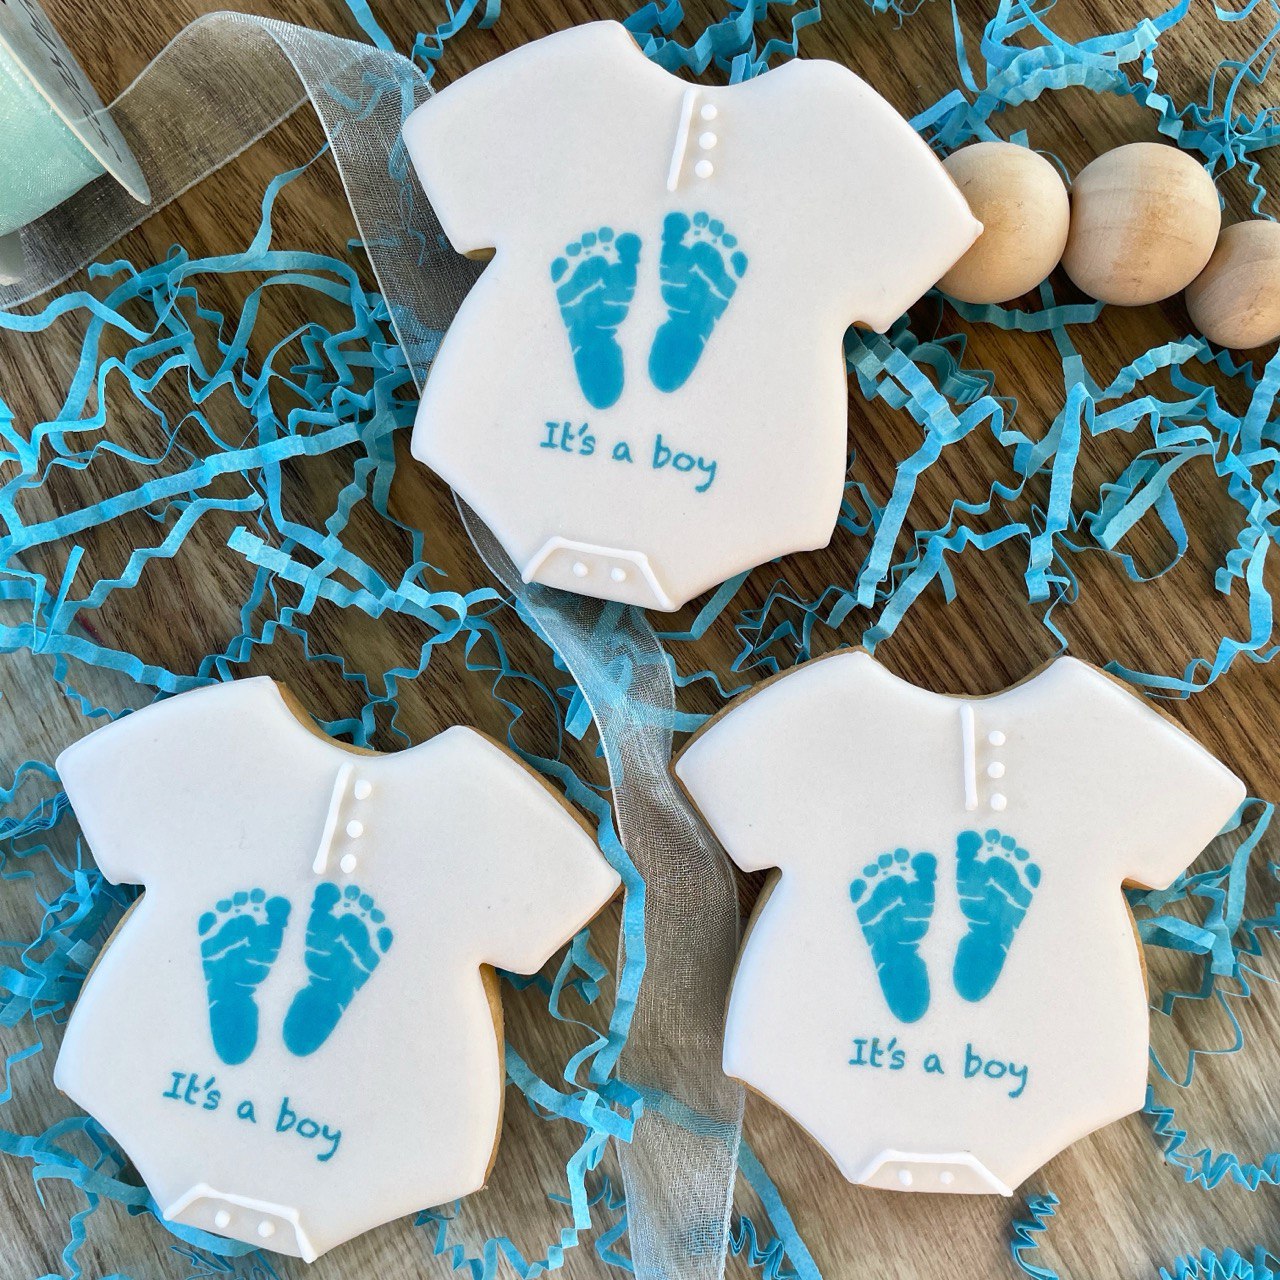 Gender Reveal Cookies (It's a boy) 8pc / Decorated Sugar Cookies